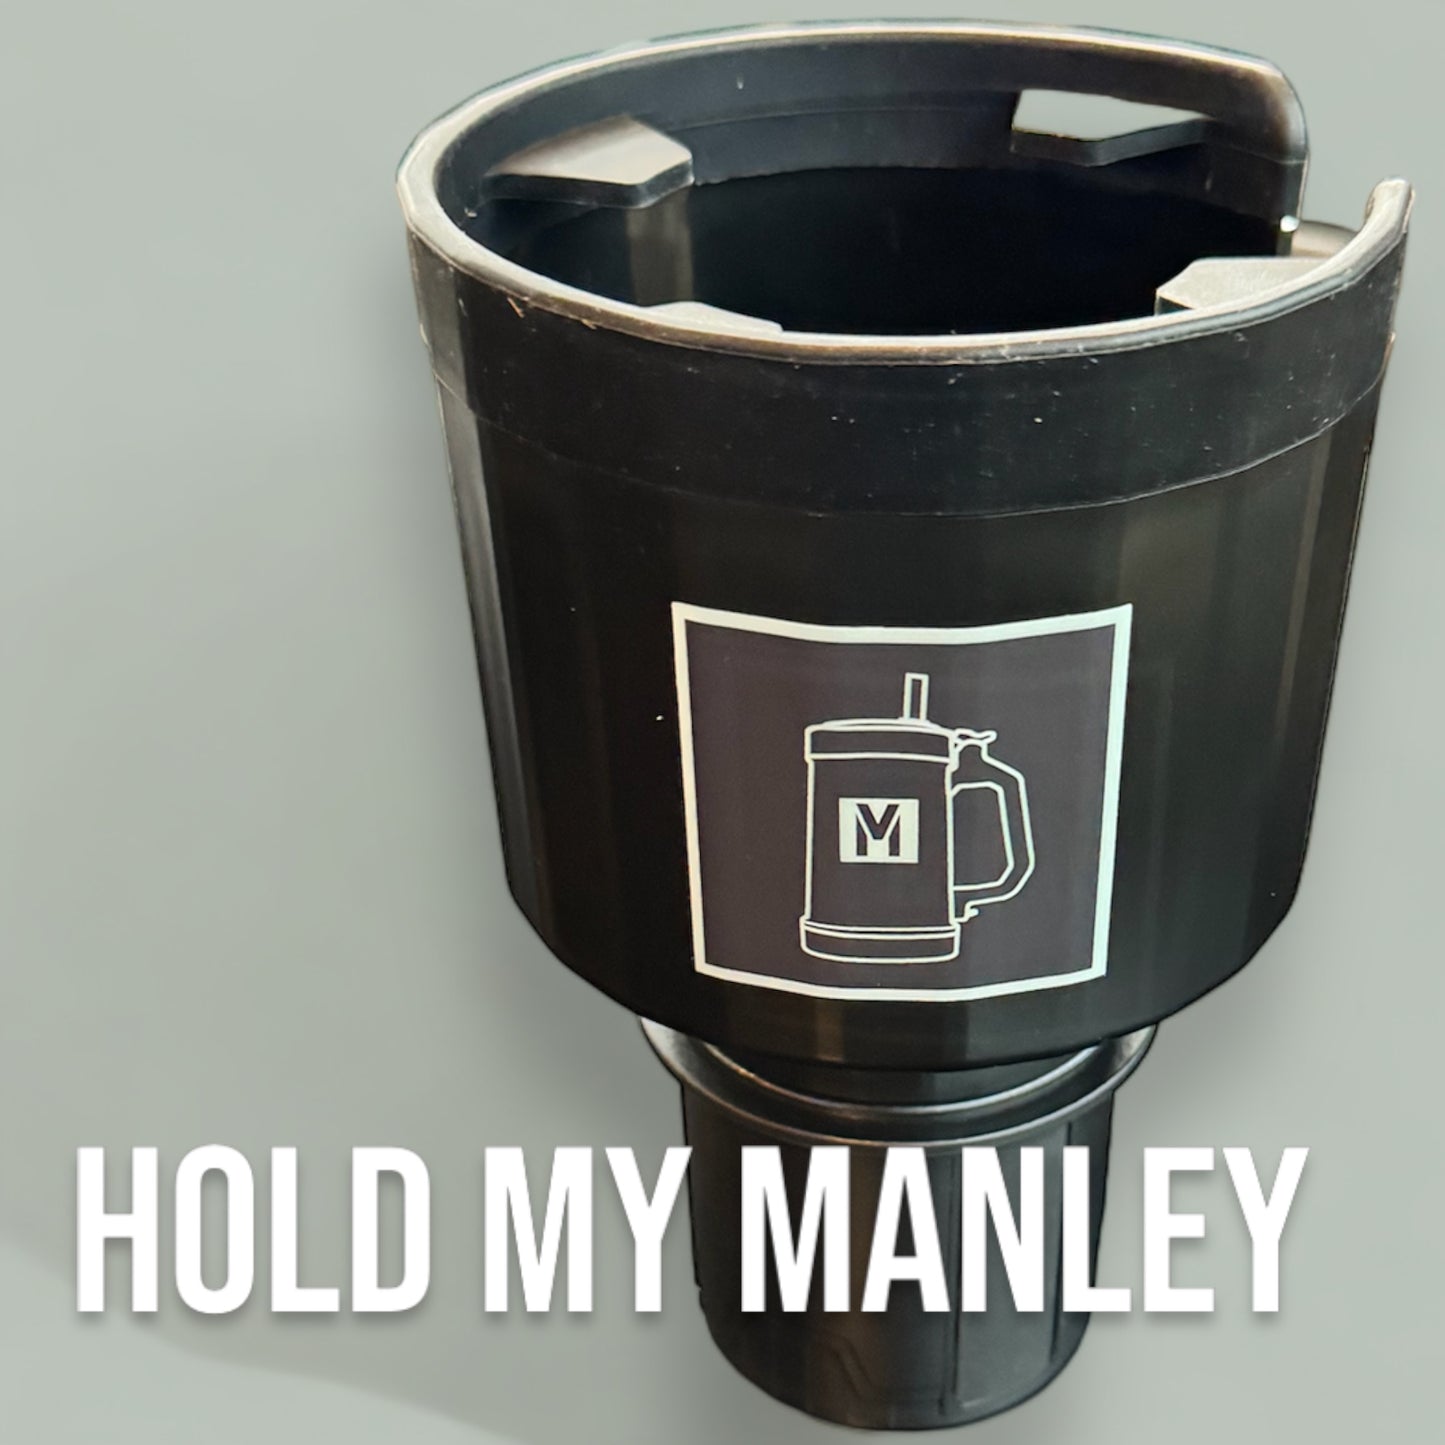 Hold My Manley